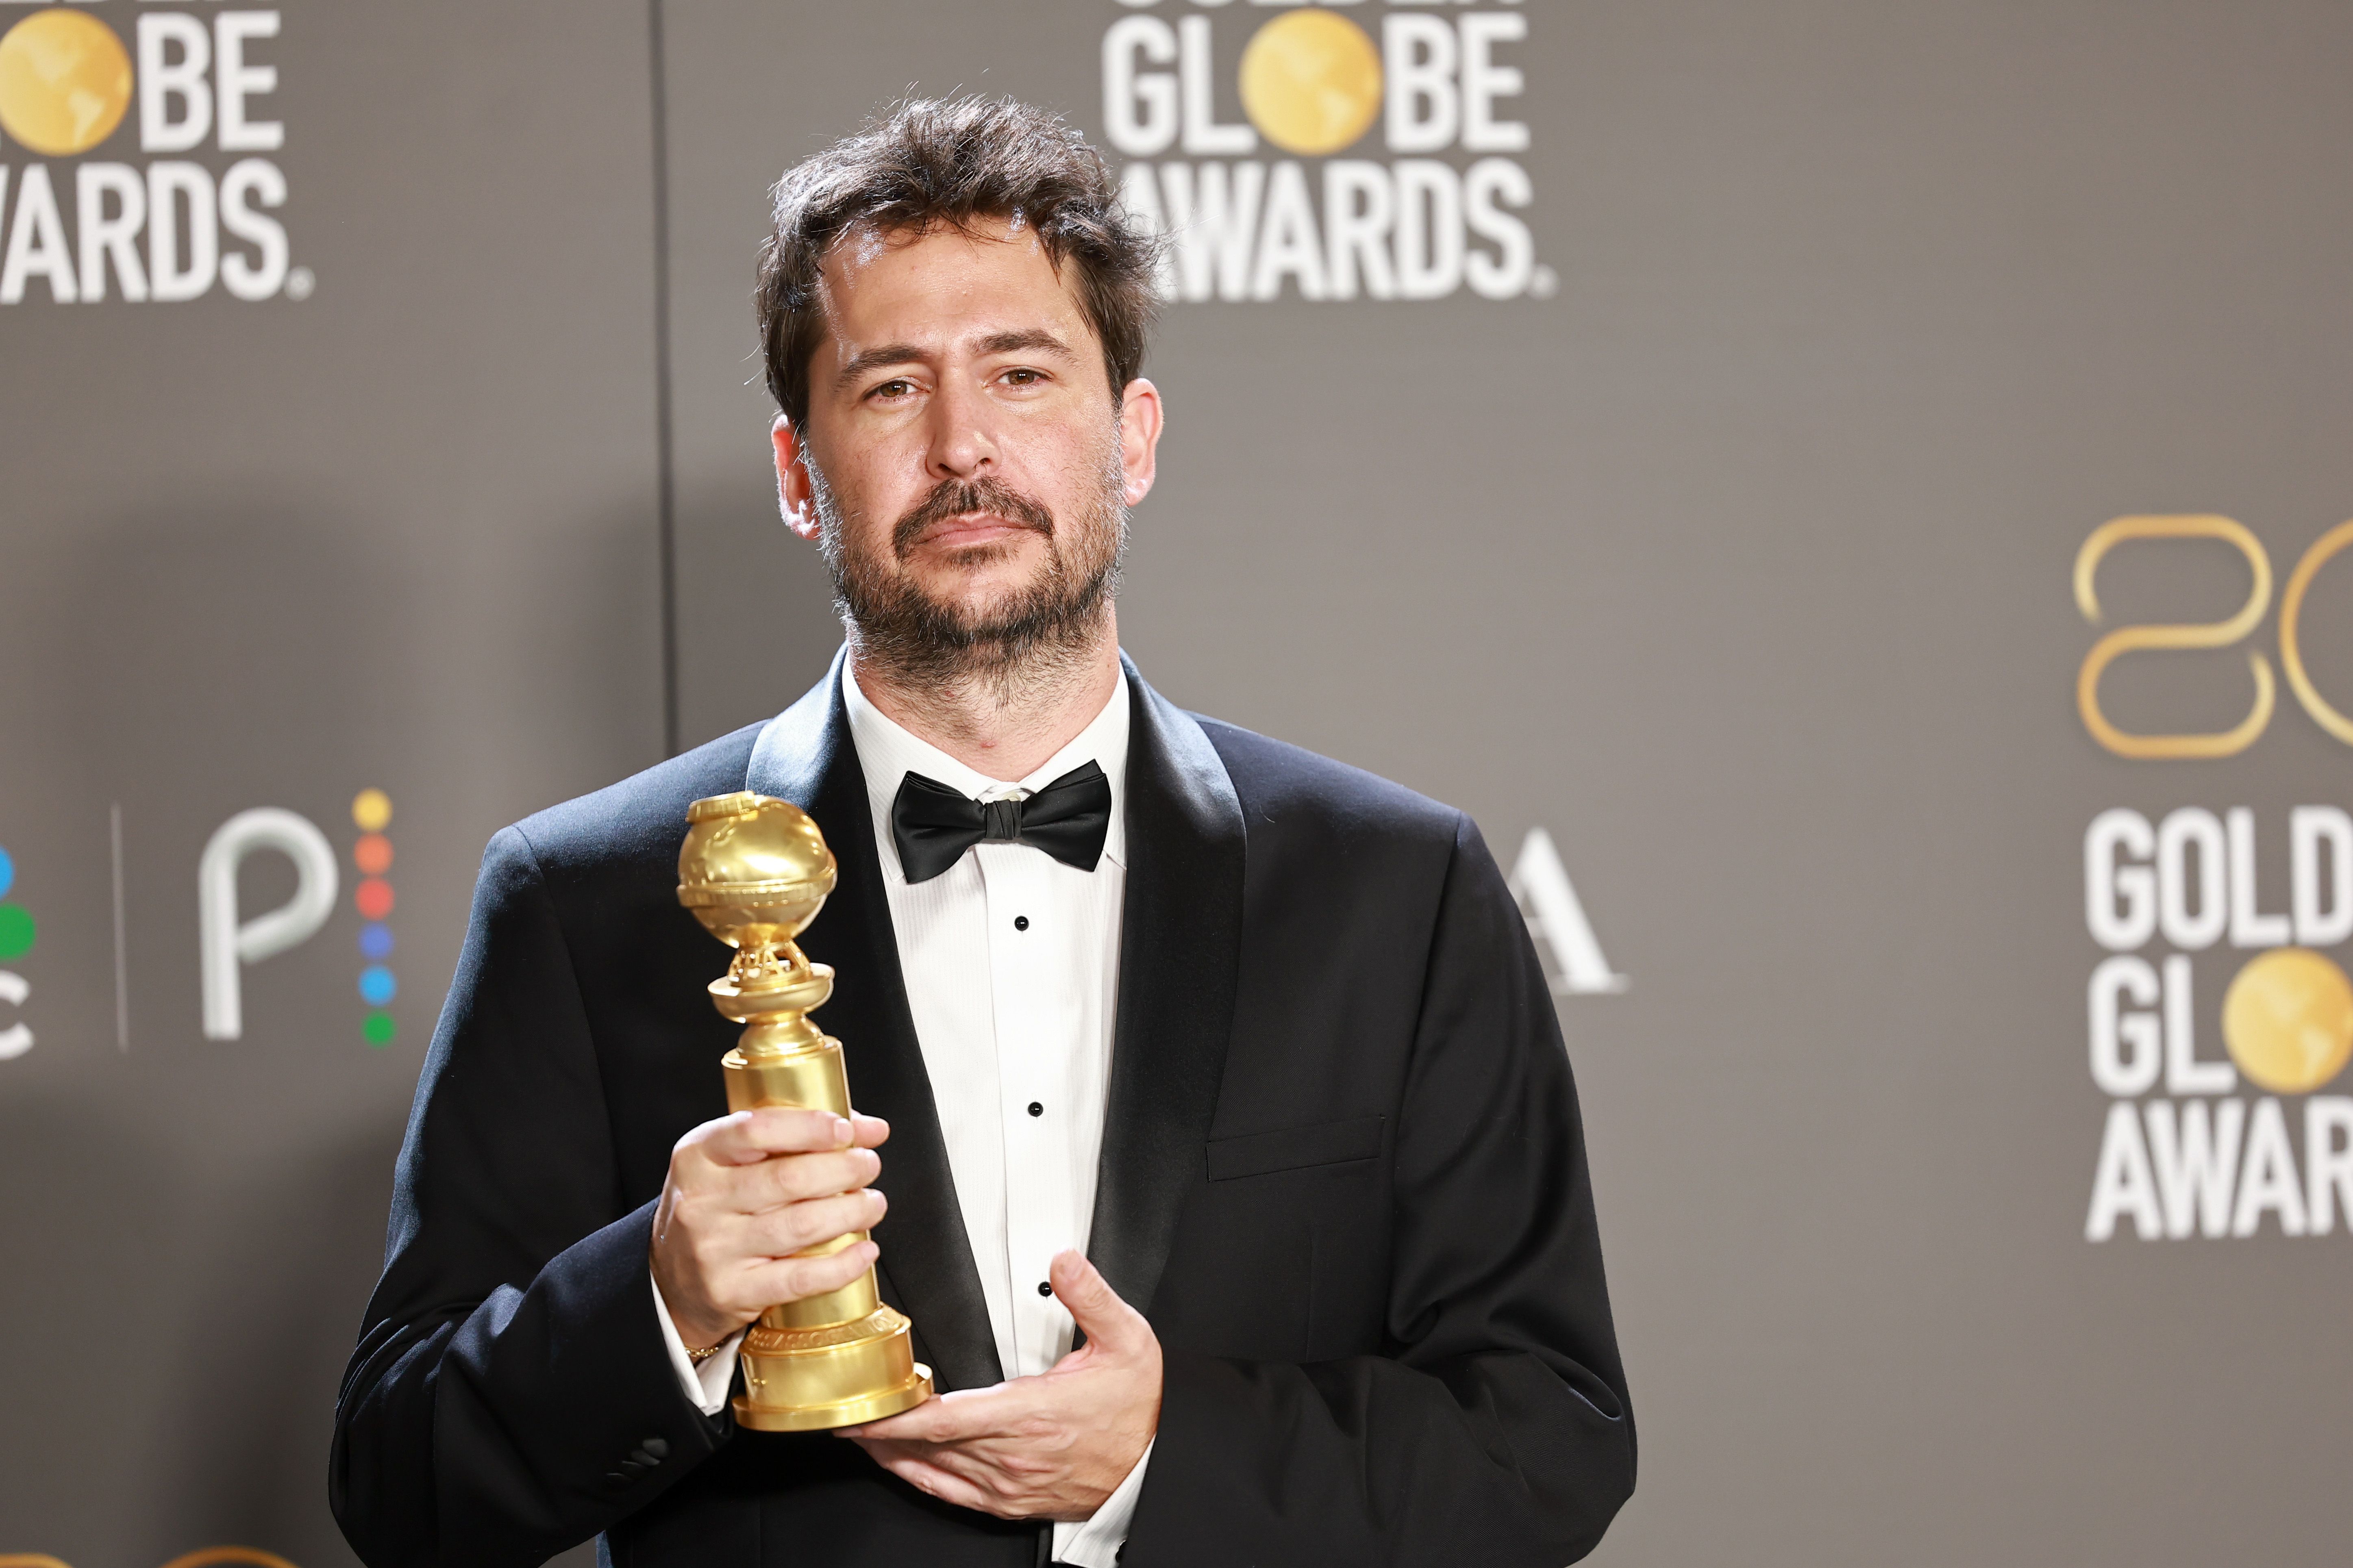 An Oscar next? Argentina won a Golden Globe and World Cup in same year — and it's not the 1st time